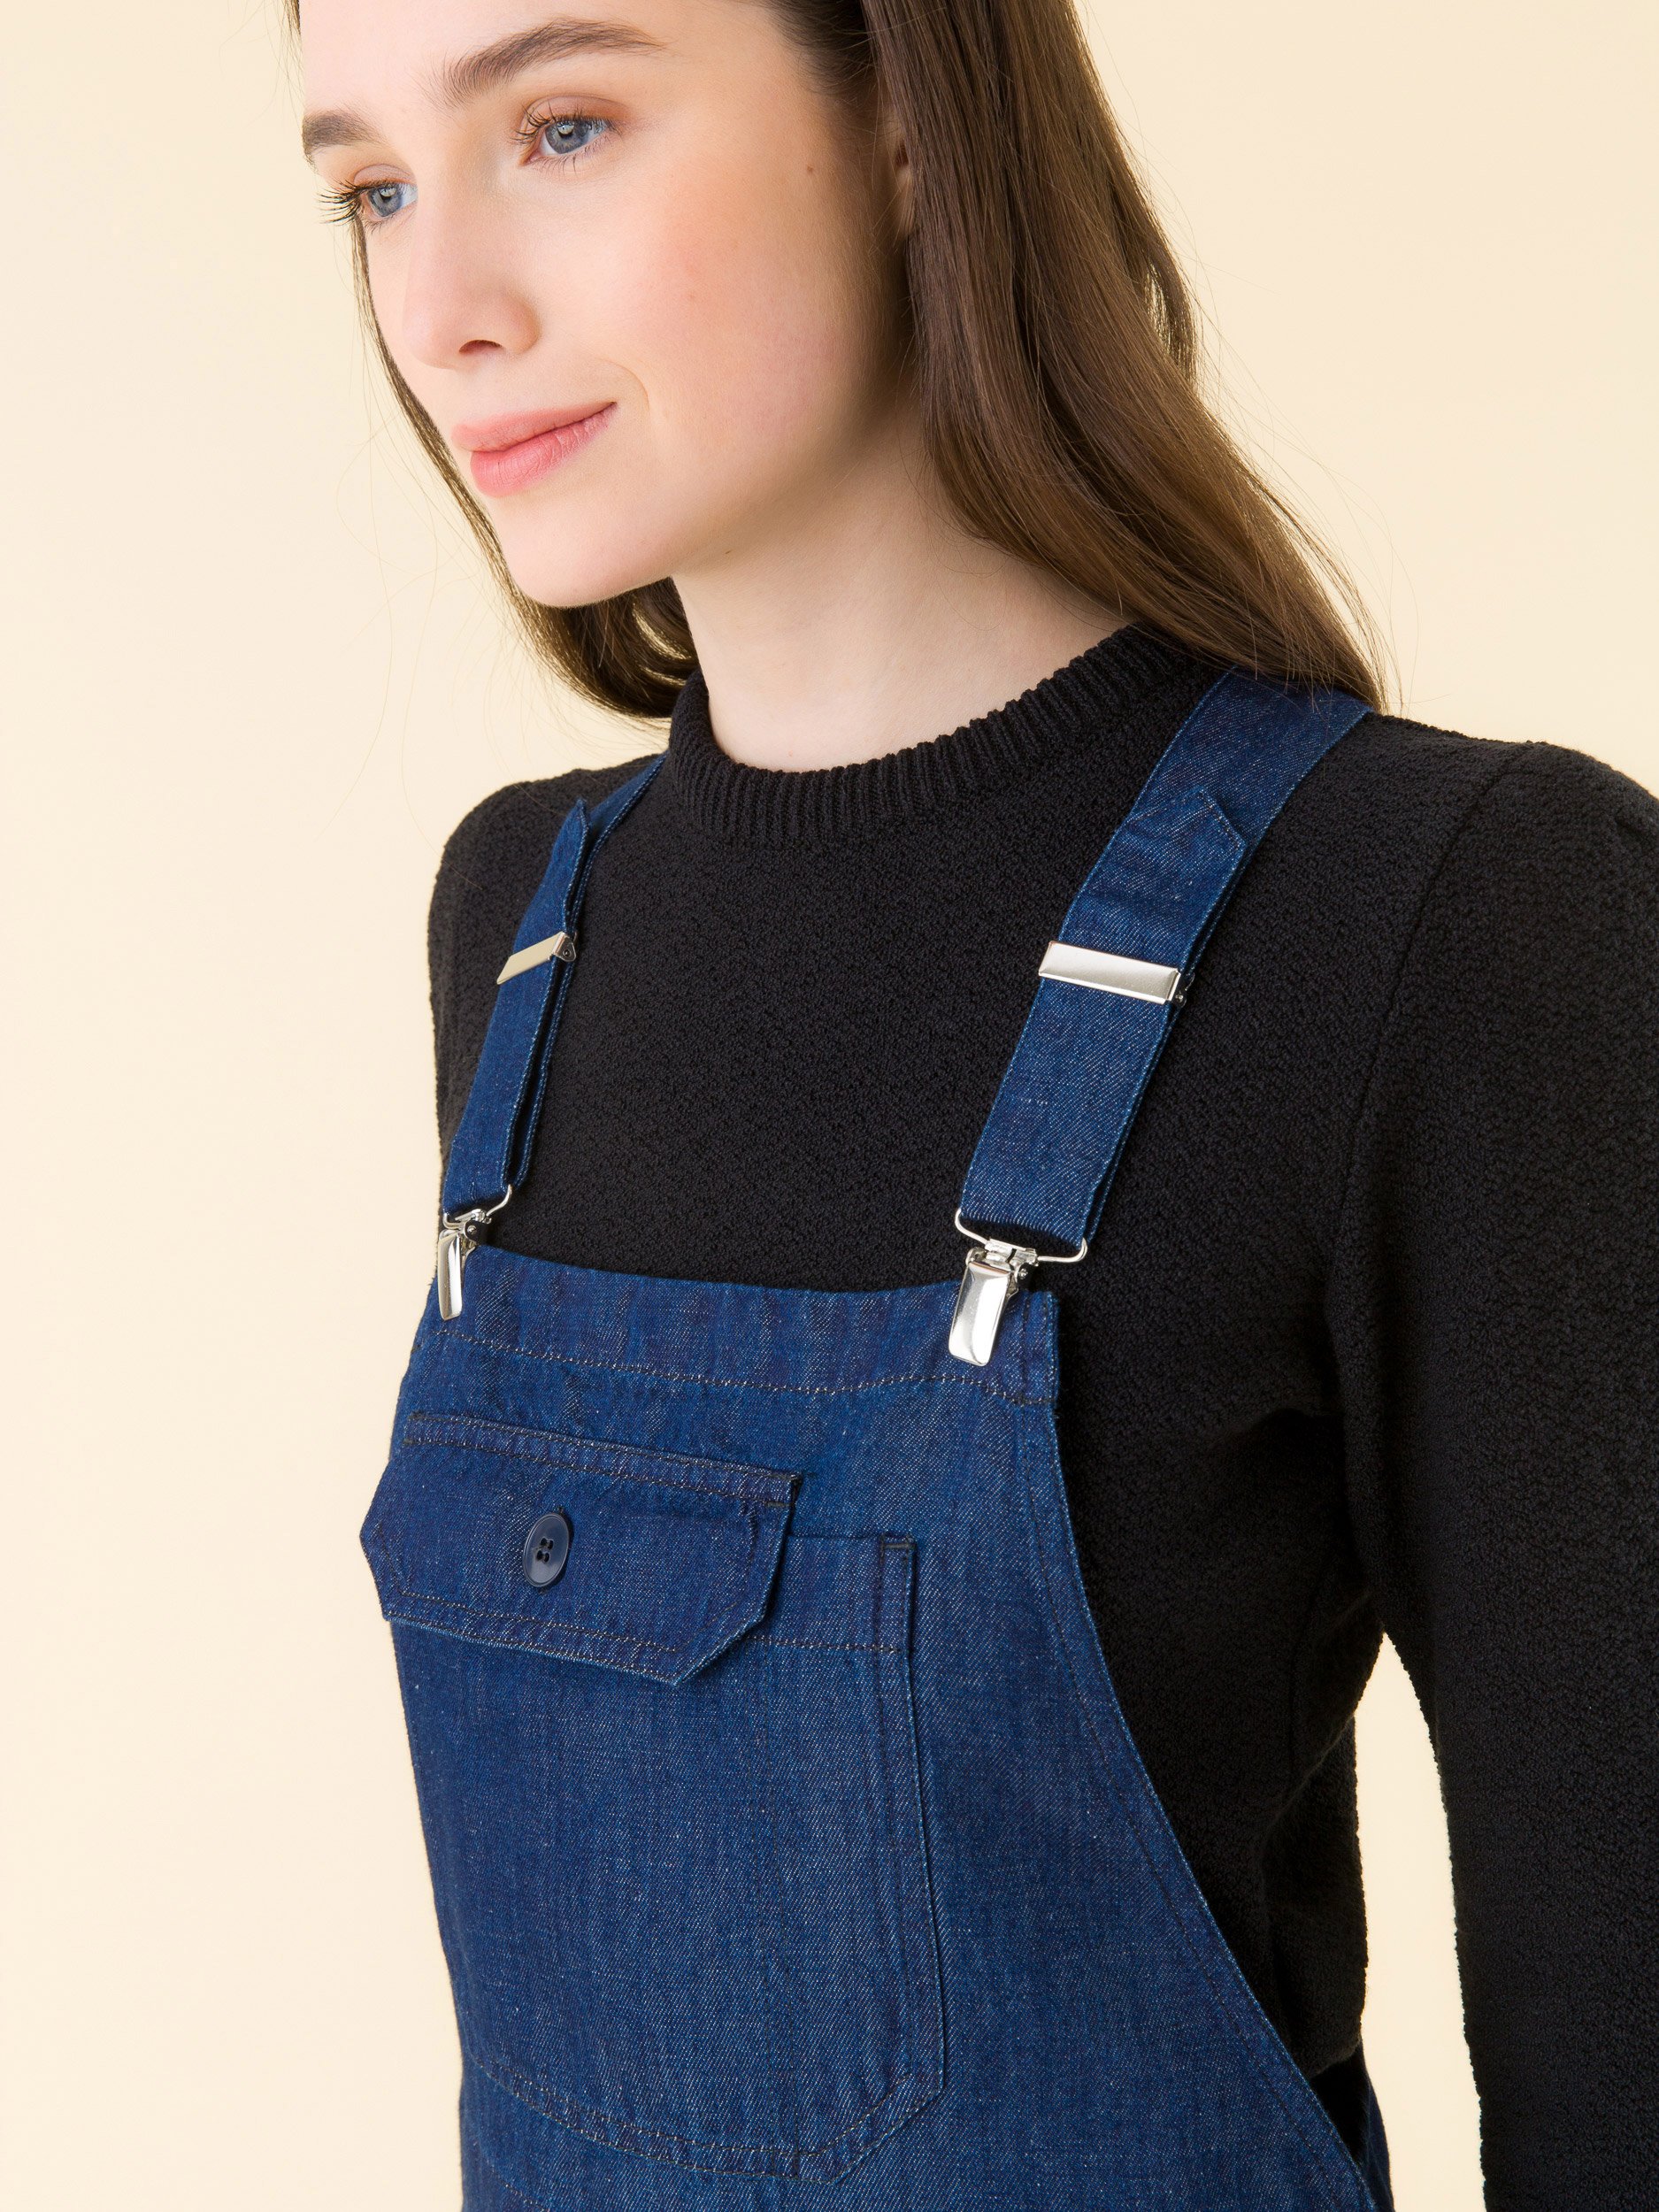 Women's Stretchable Denim Washed effect Capri Style Dungarees(inner not  provided) - StyleStone | Dungaree dress, Denim dungaree dress, Denim wash